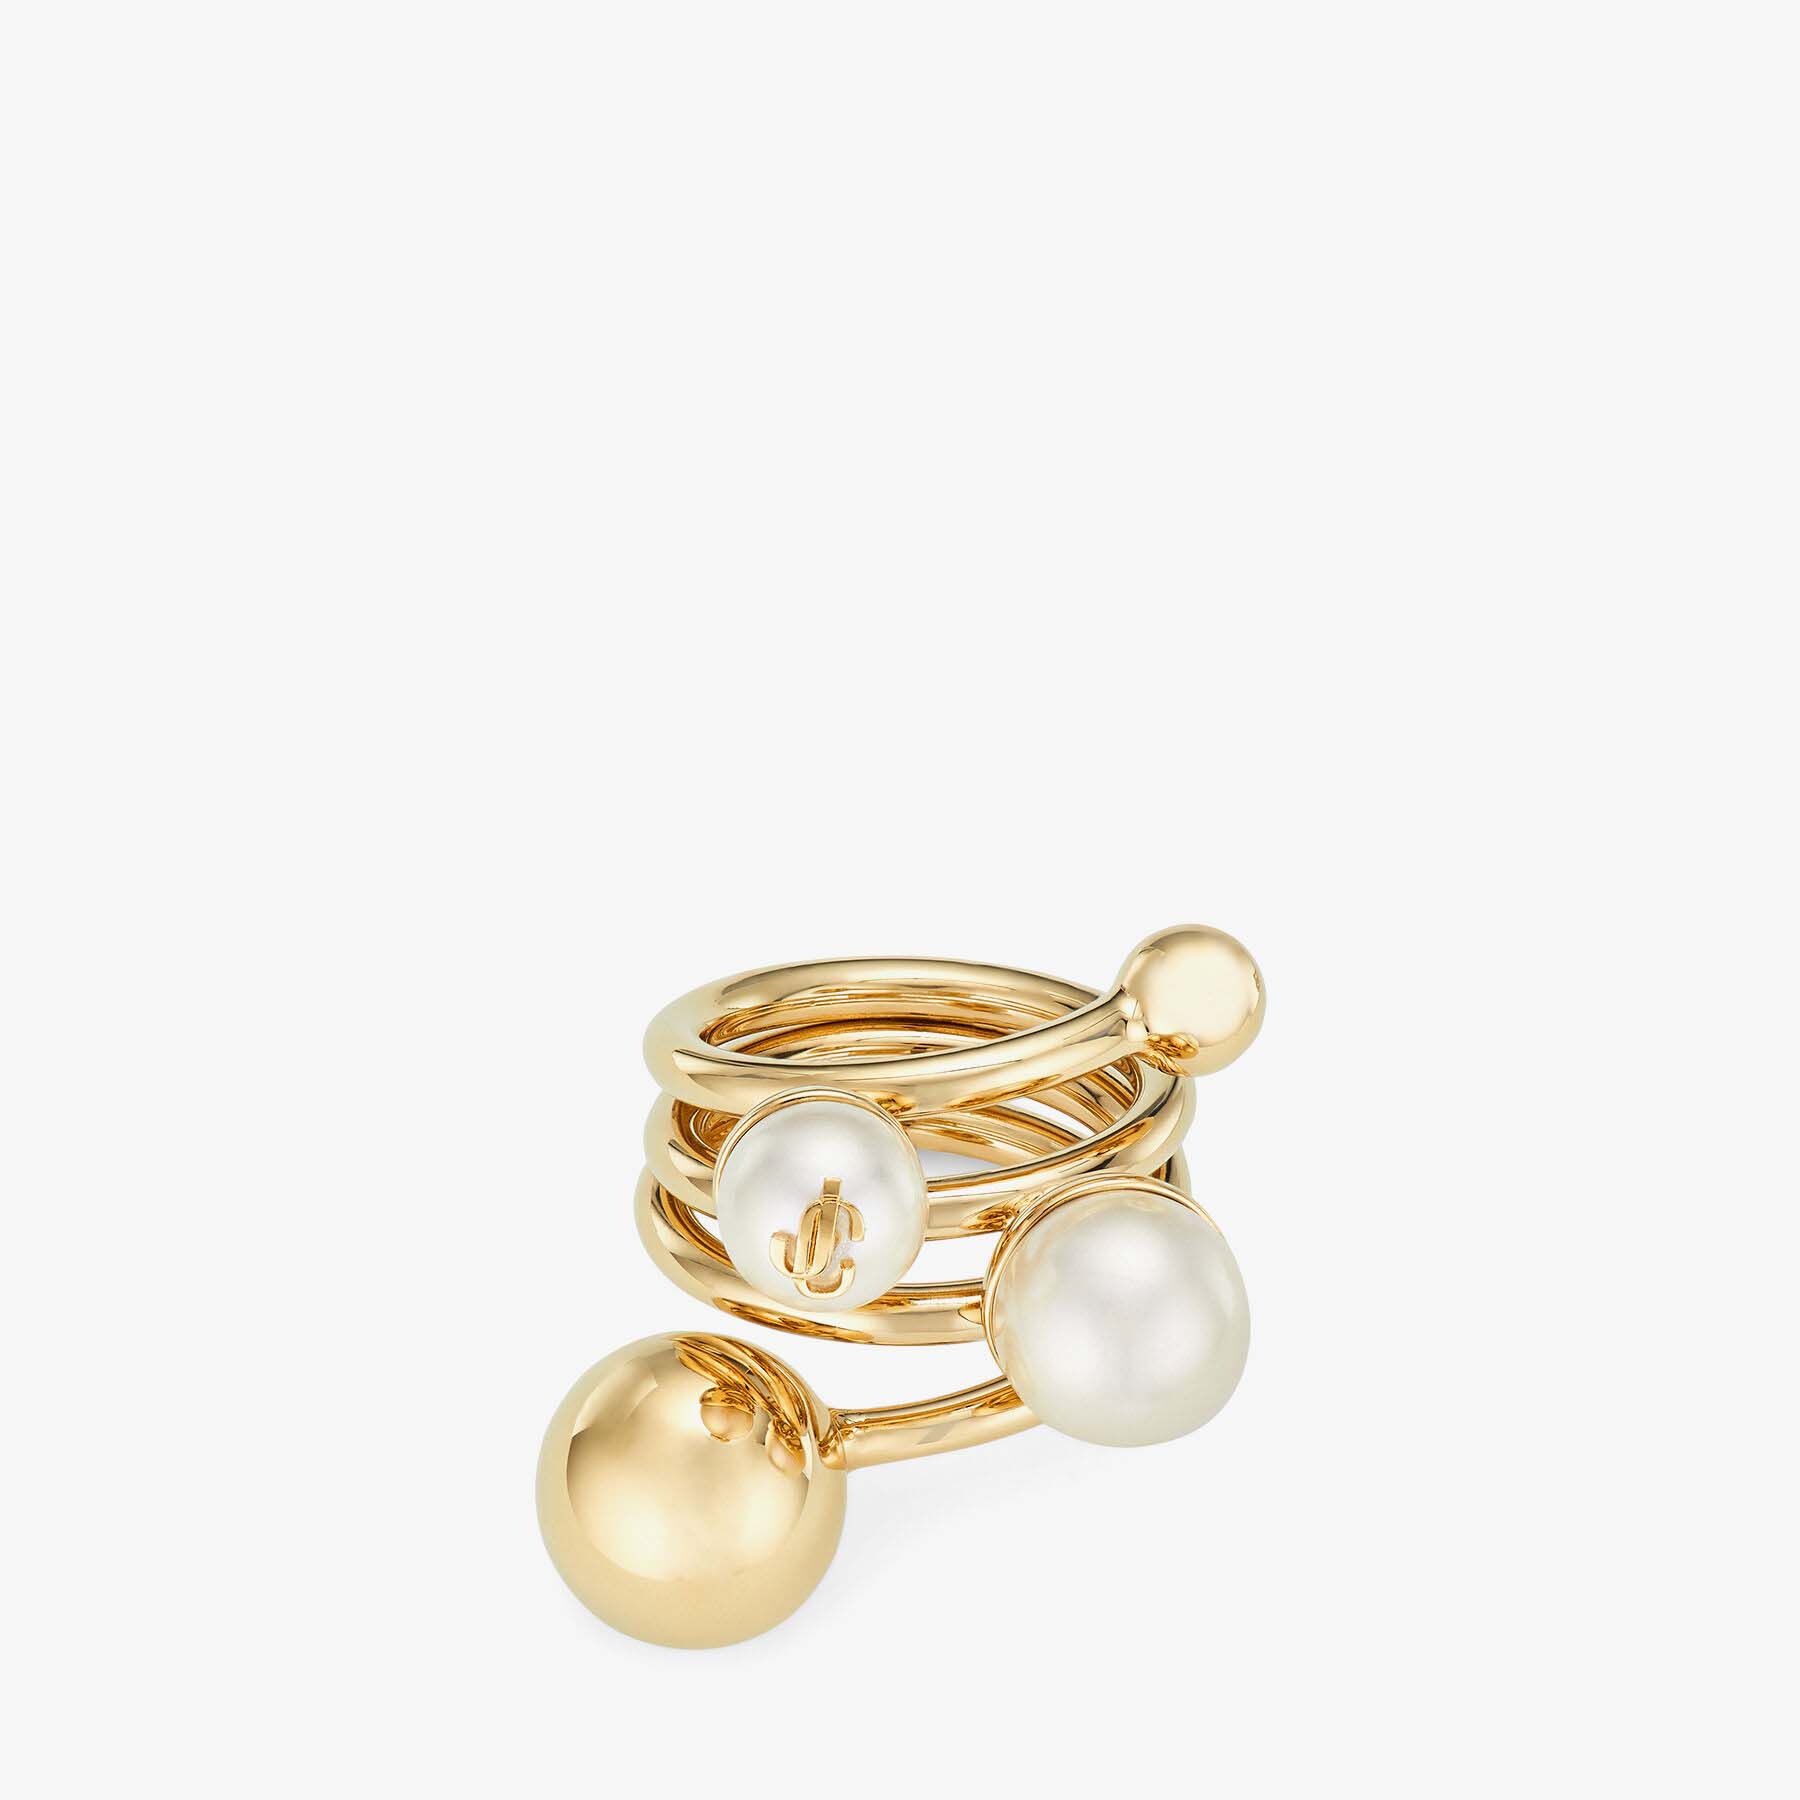 Gold-Finish Metal Ring with Pearls | JC Multi Pearl Ring 